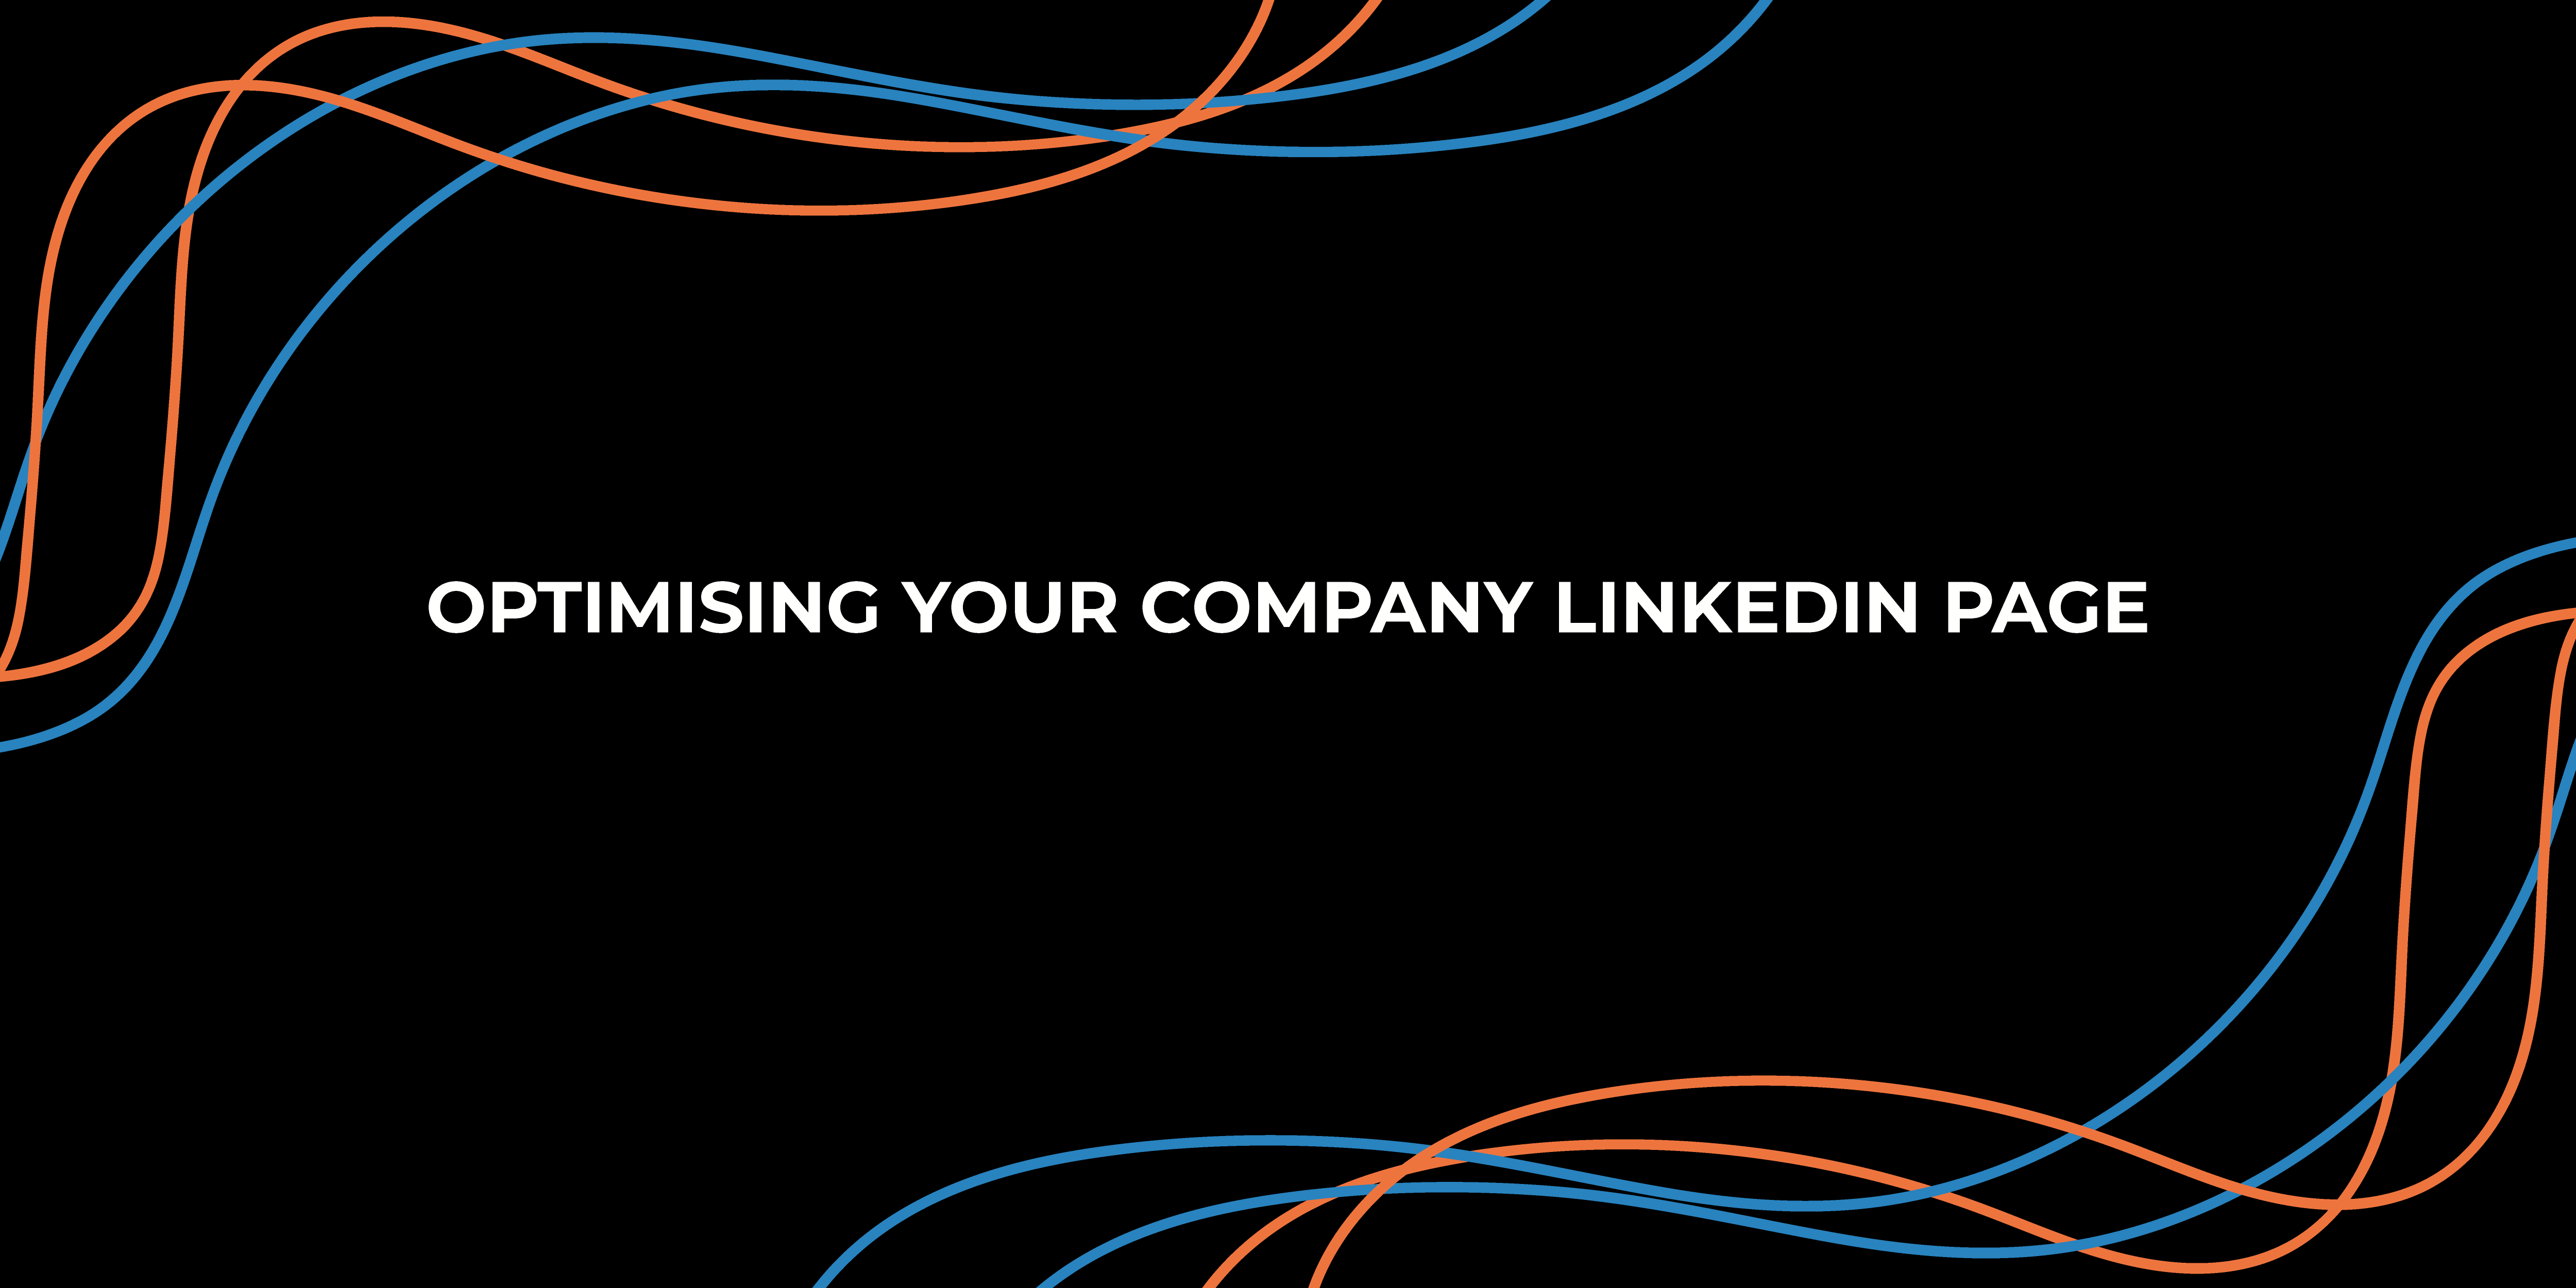 Optimising Your Company LinkedIn Page